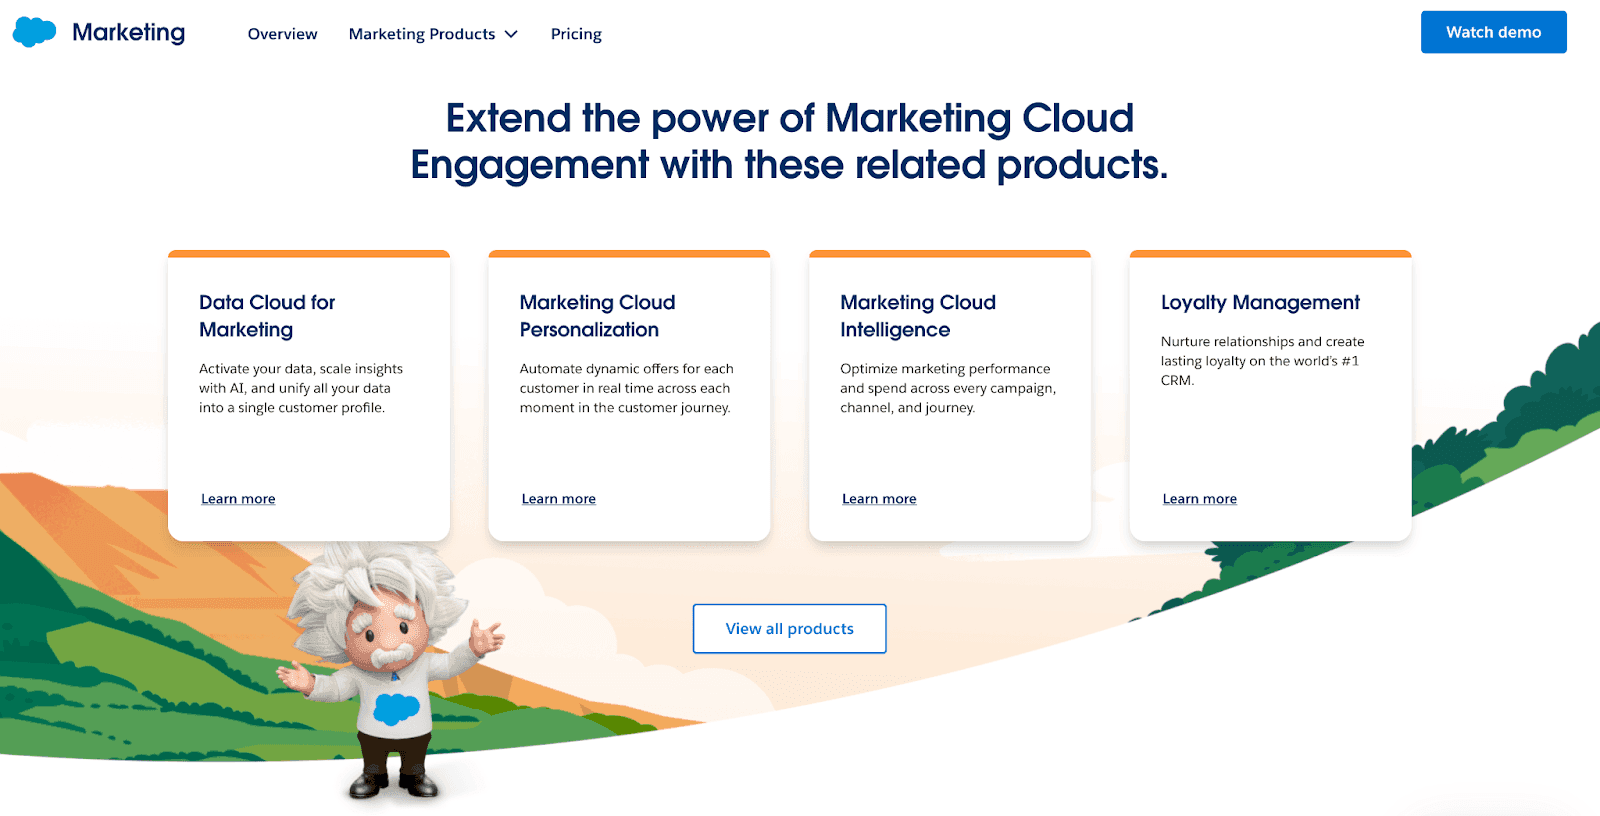 Extend the power of marketing cloud engagement with related products